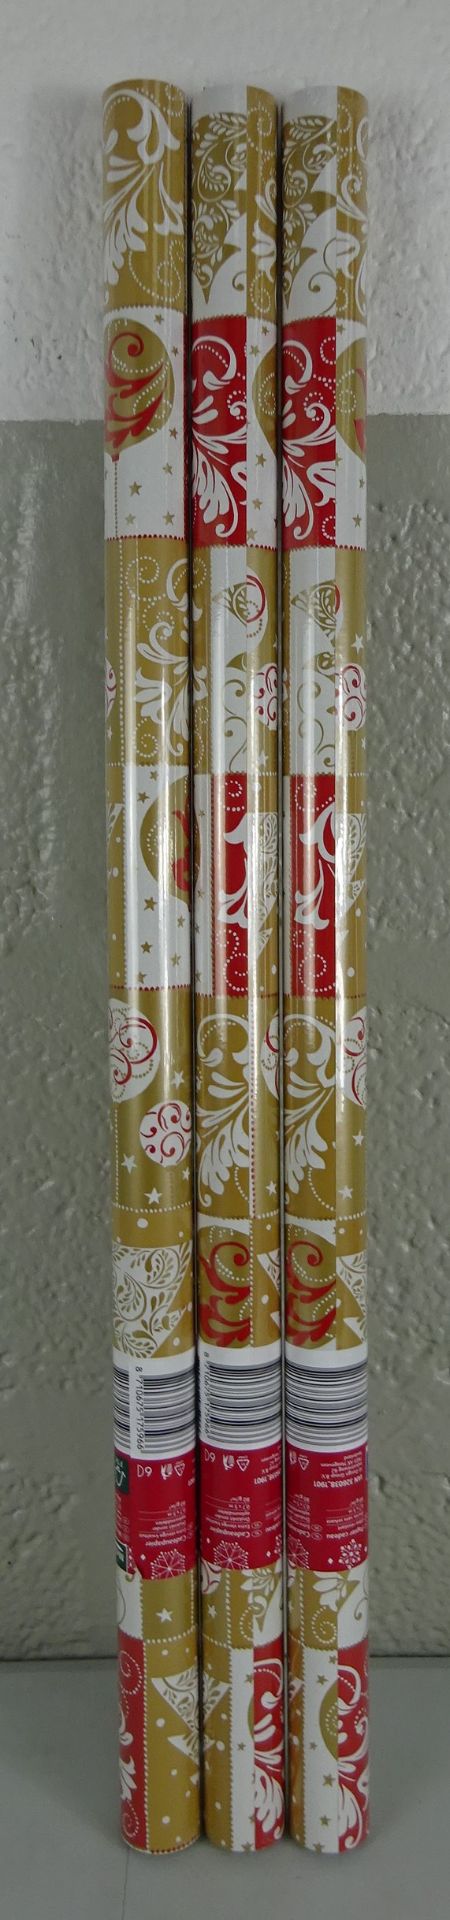 X3 BRAND NEW ROLLS OF GOLD CHRISTMAS TREE WRAPPING PAPER, PRICE MARKED 99P EACH